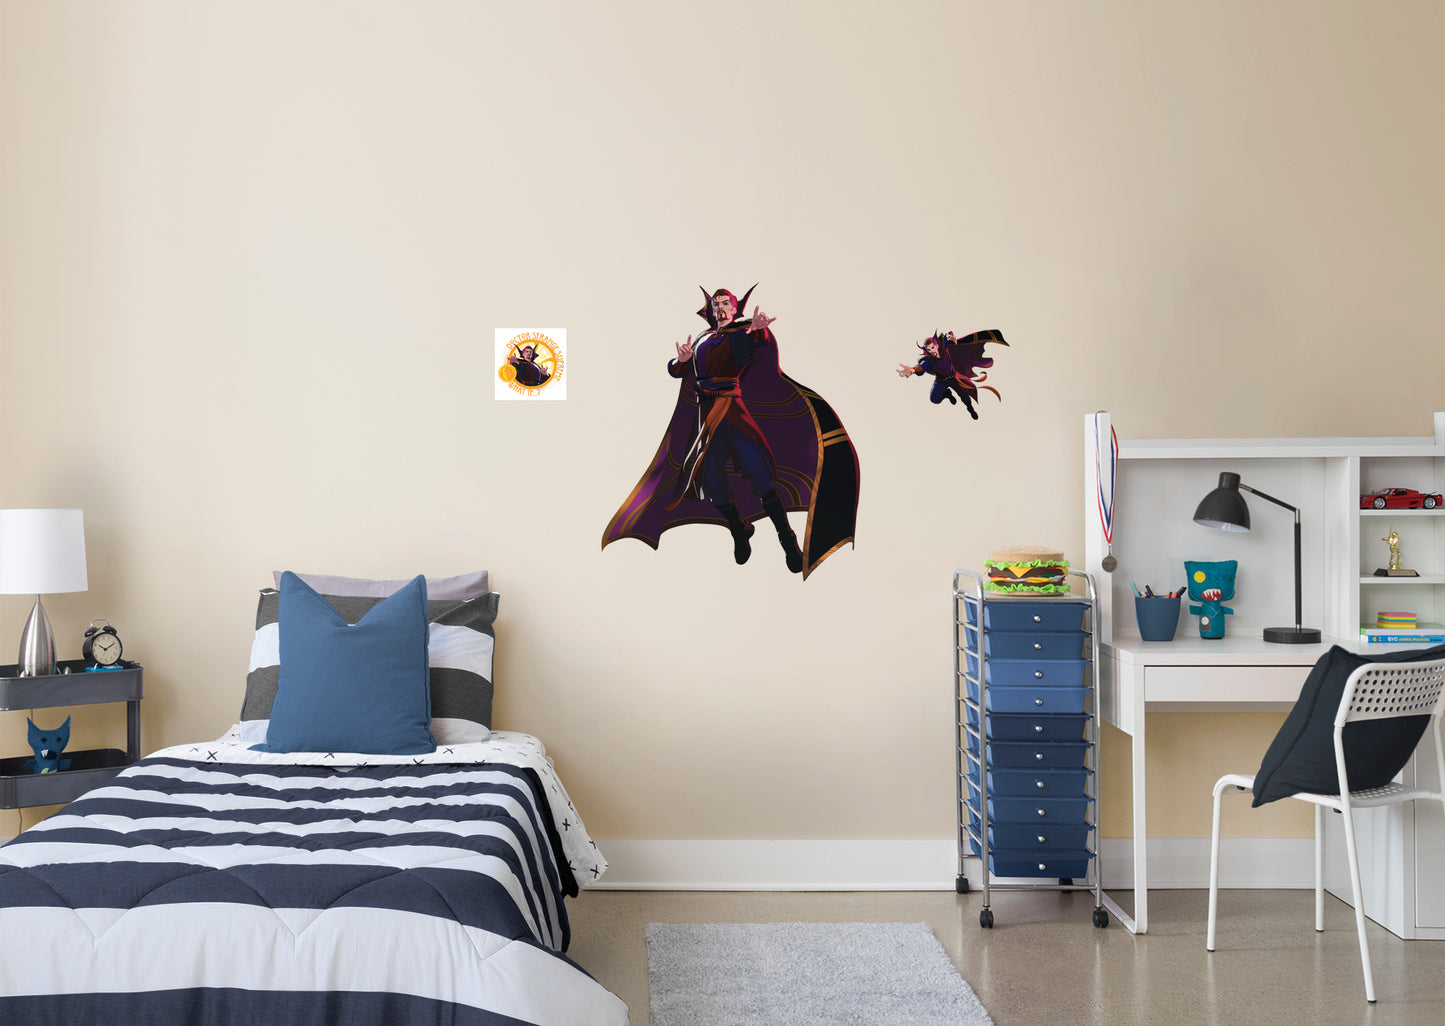 What If...: Doctor Strange Supreme RealBig        - Officially Licensed Marvel Removable Wall   Adhesive Decal